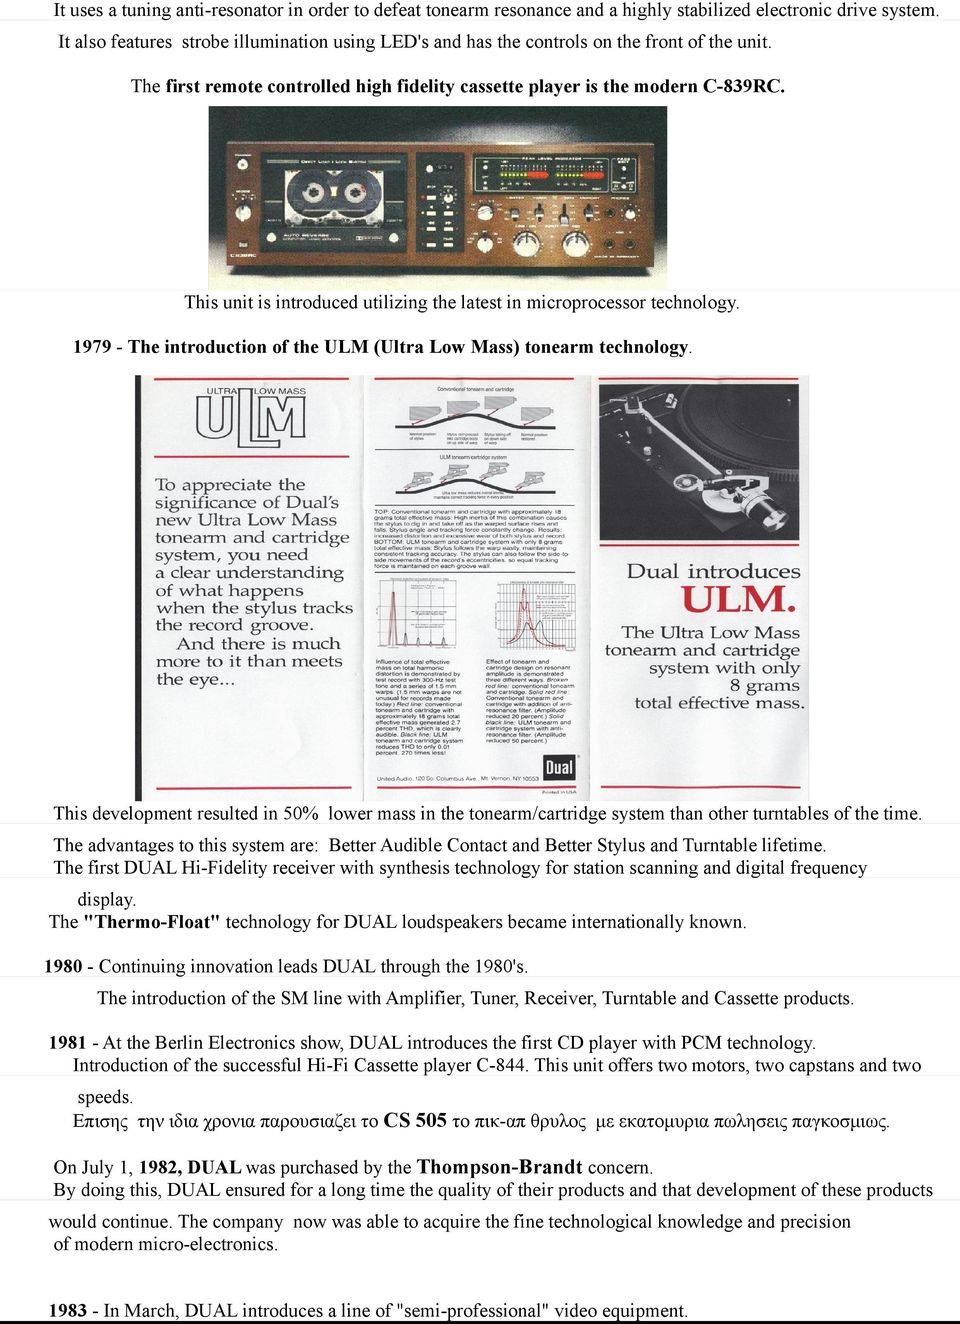 This unit is introduced utilizing the latest in microprocessor technology. 1979 - The introduction of the ULM (Ultra Low Mass) tonearm technology.